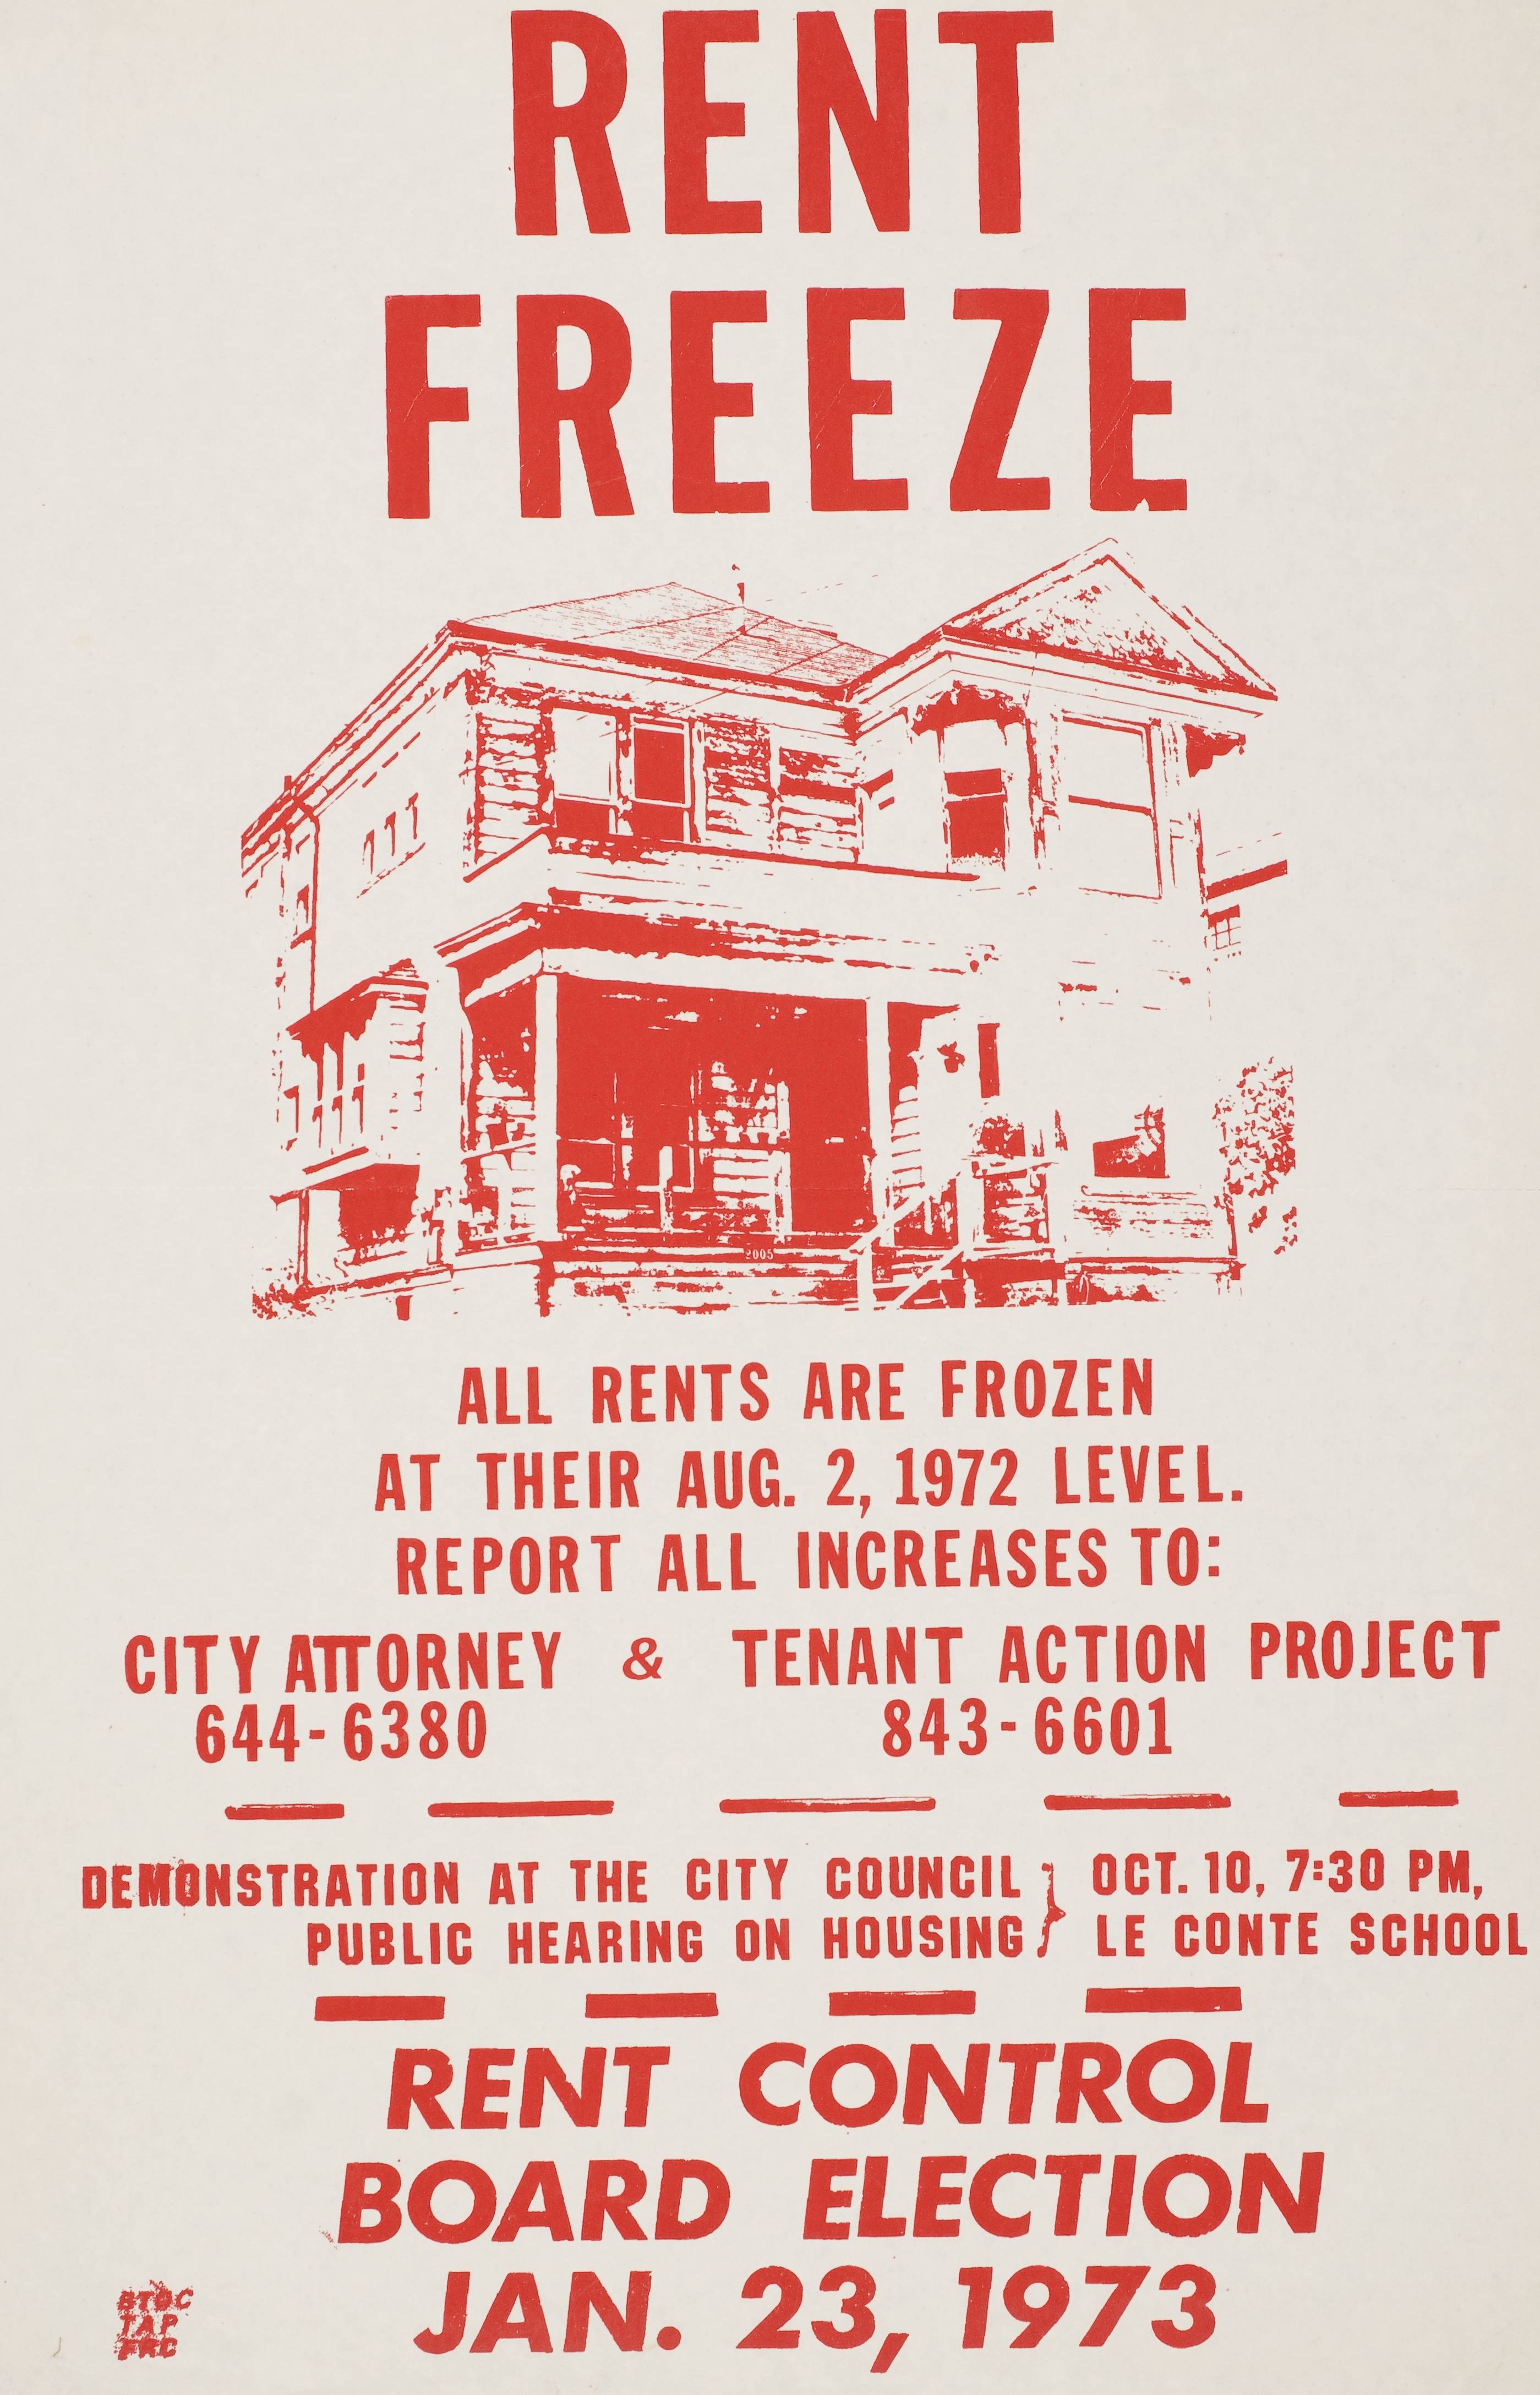 Poster saying all rents are frozen